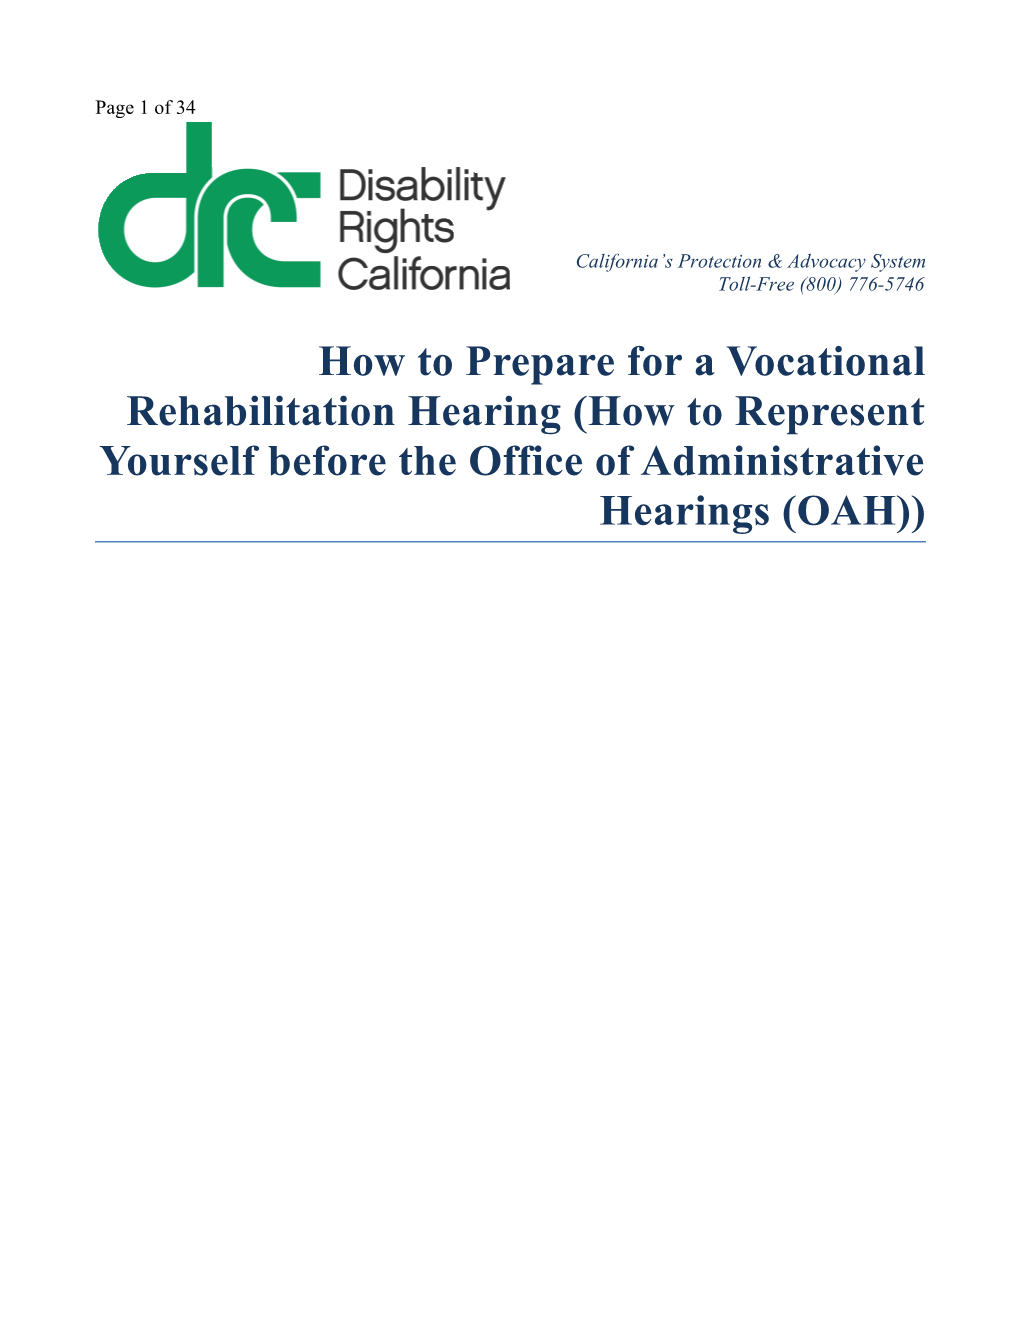 How to Prepare for a Vocational Rehabilitation Hearing (How to Represent Yourself Before